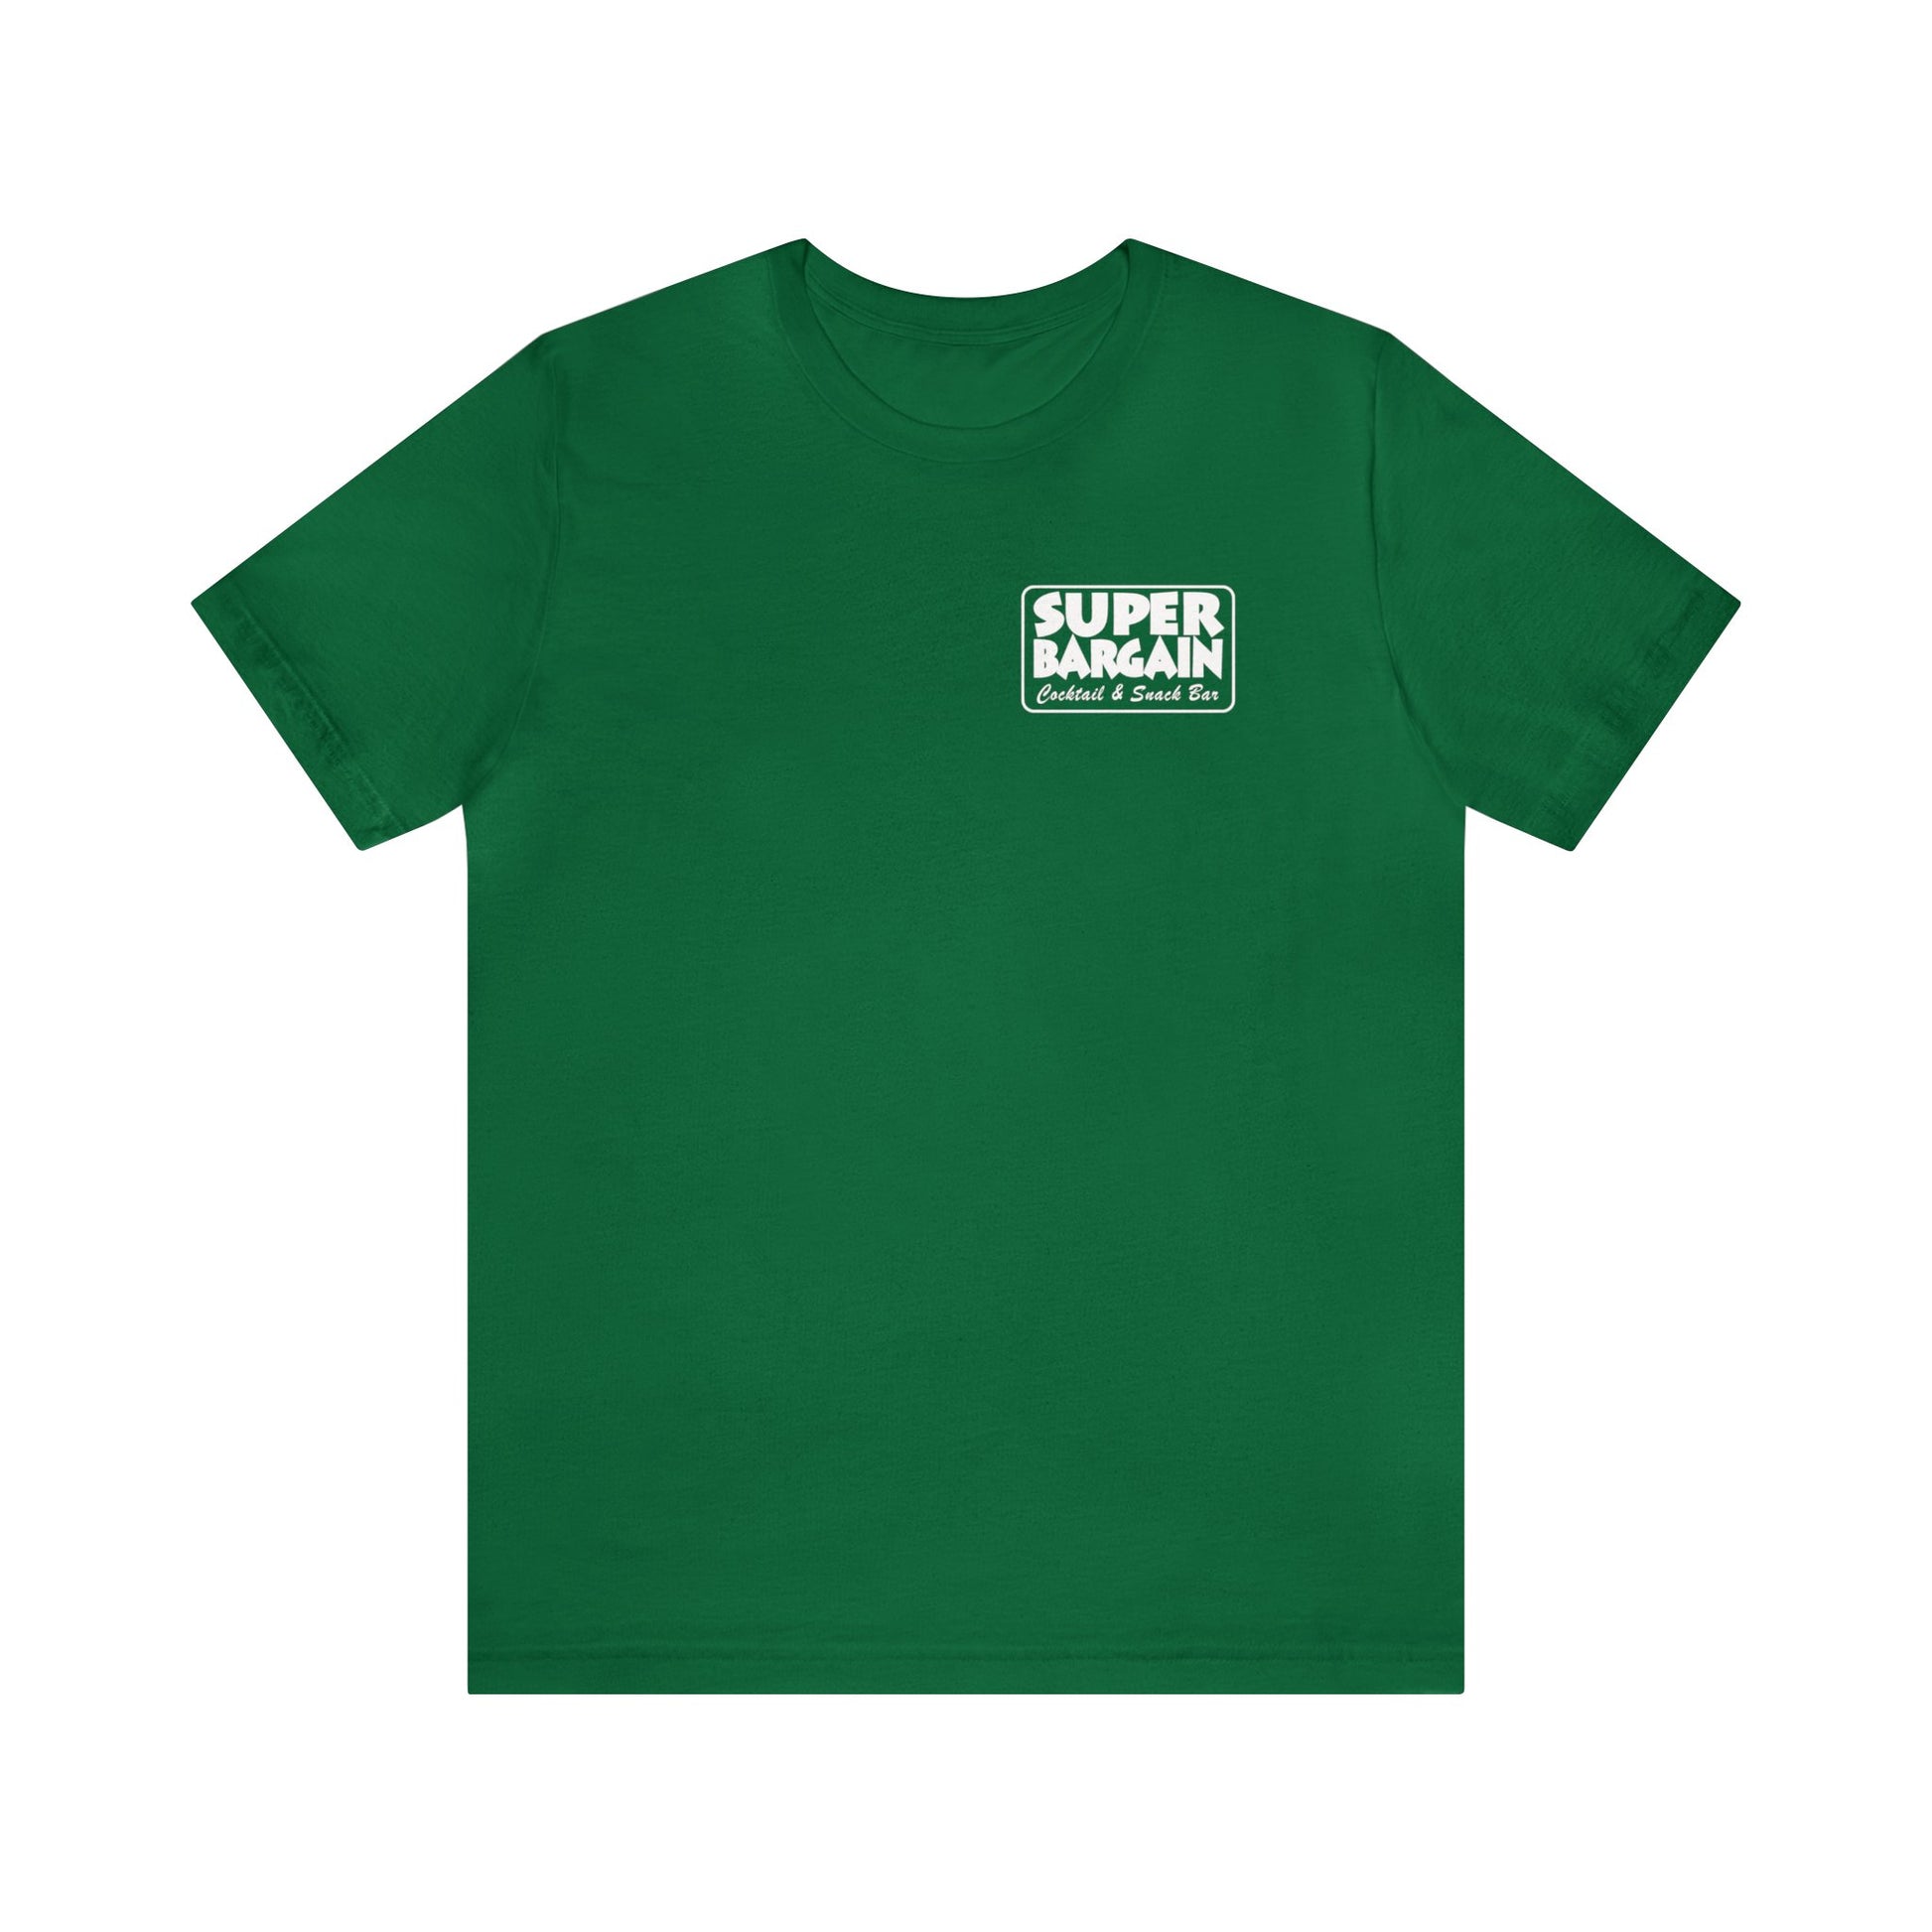 A green Unisex Jersey Short Sleeve Monochrome Logo Tee with a small logo on the left chest that says "Super Easy Online Store" in white text on a blue background, featuring a unique Cabbagetown design by Printify.